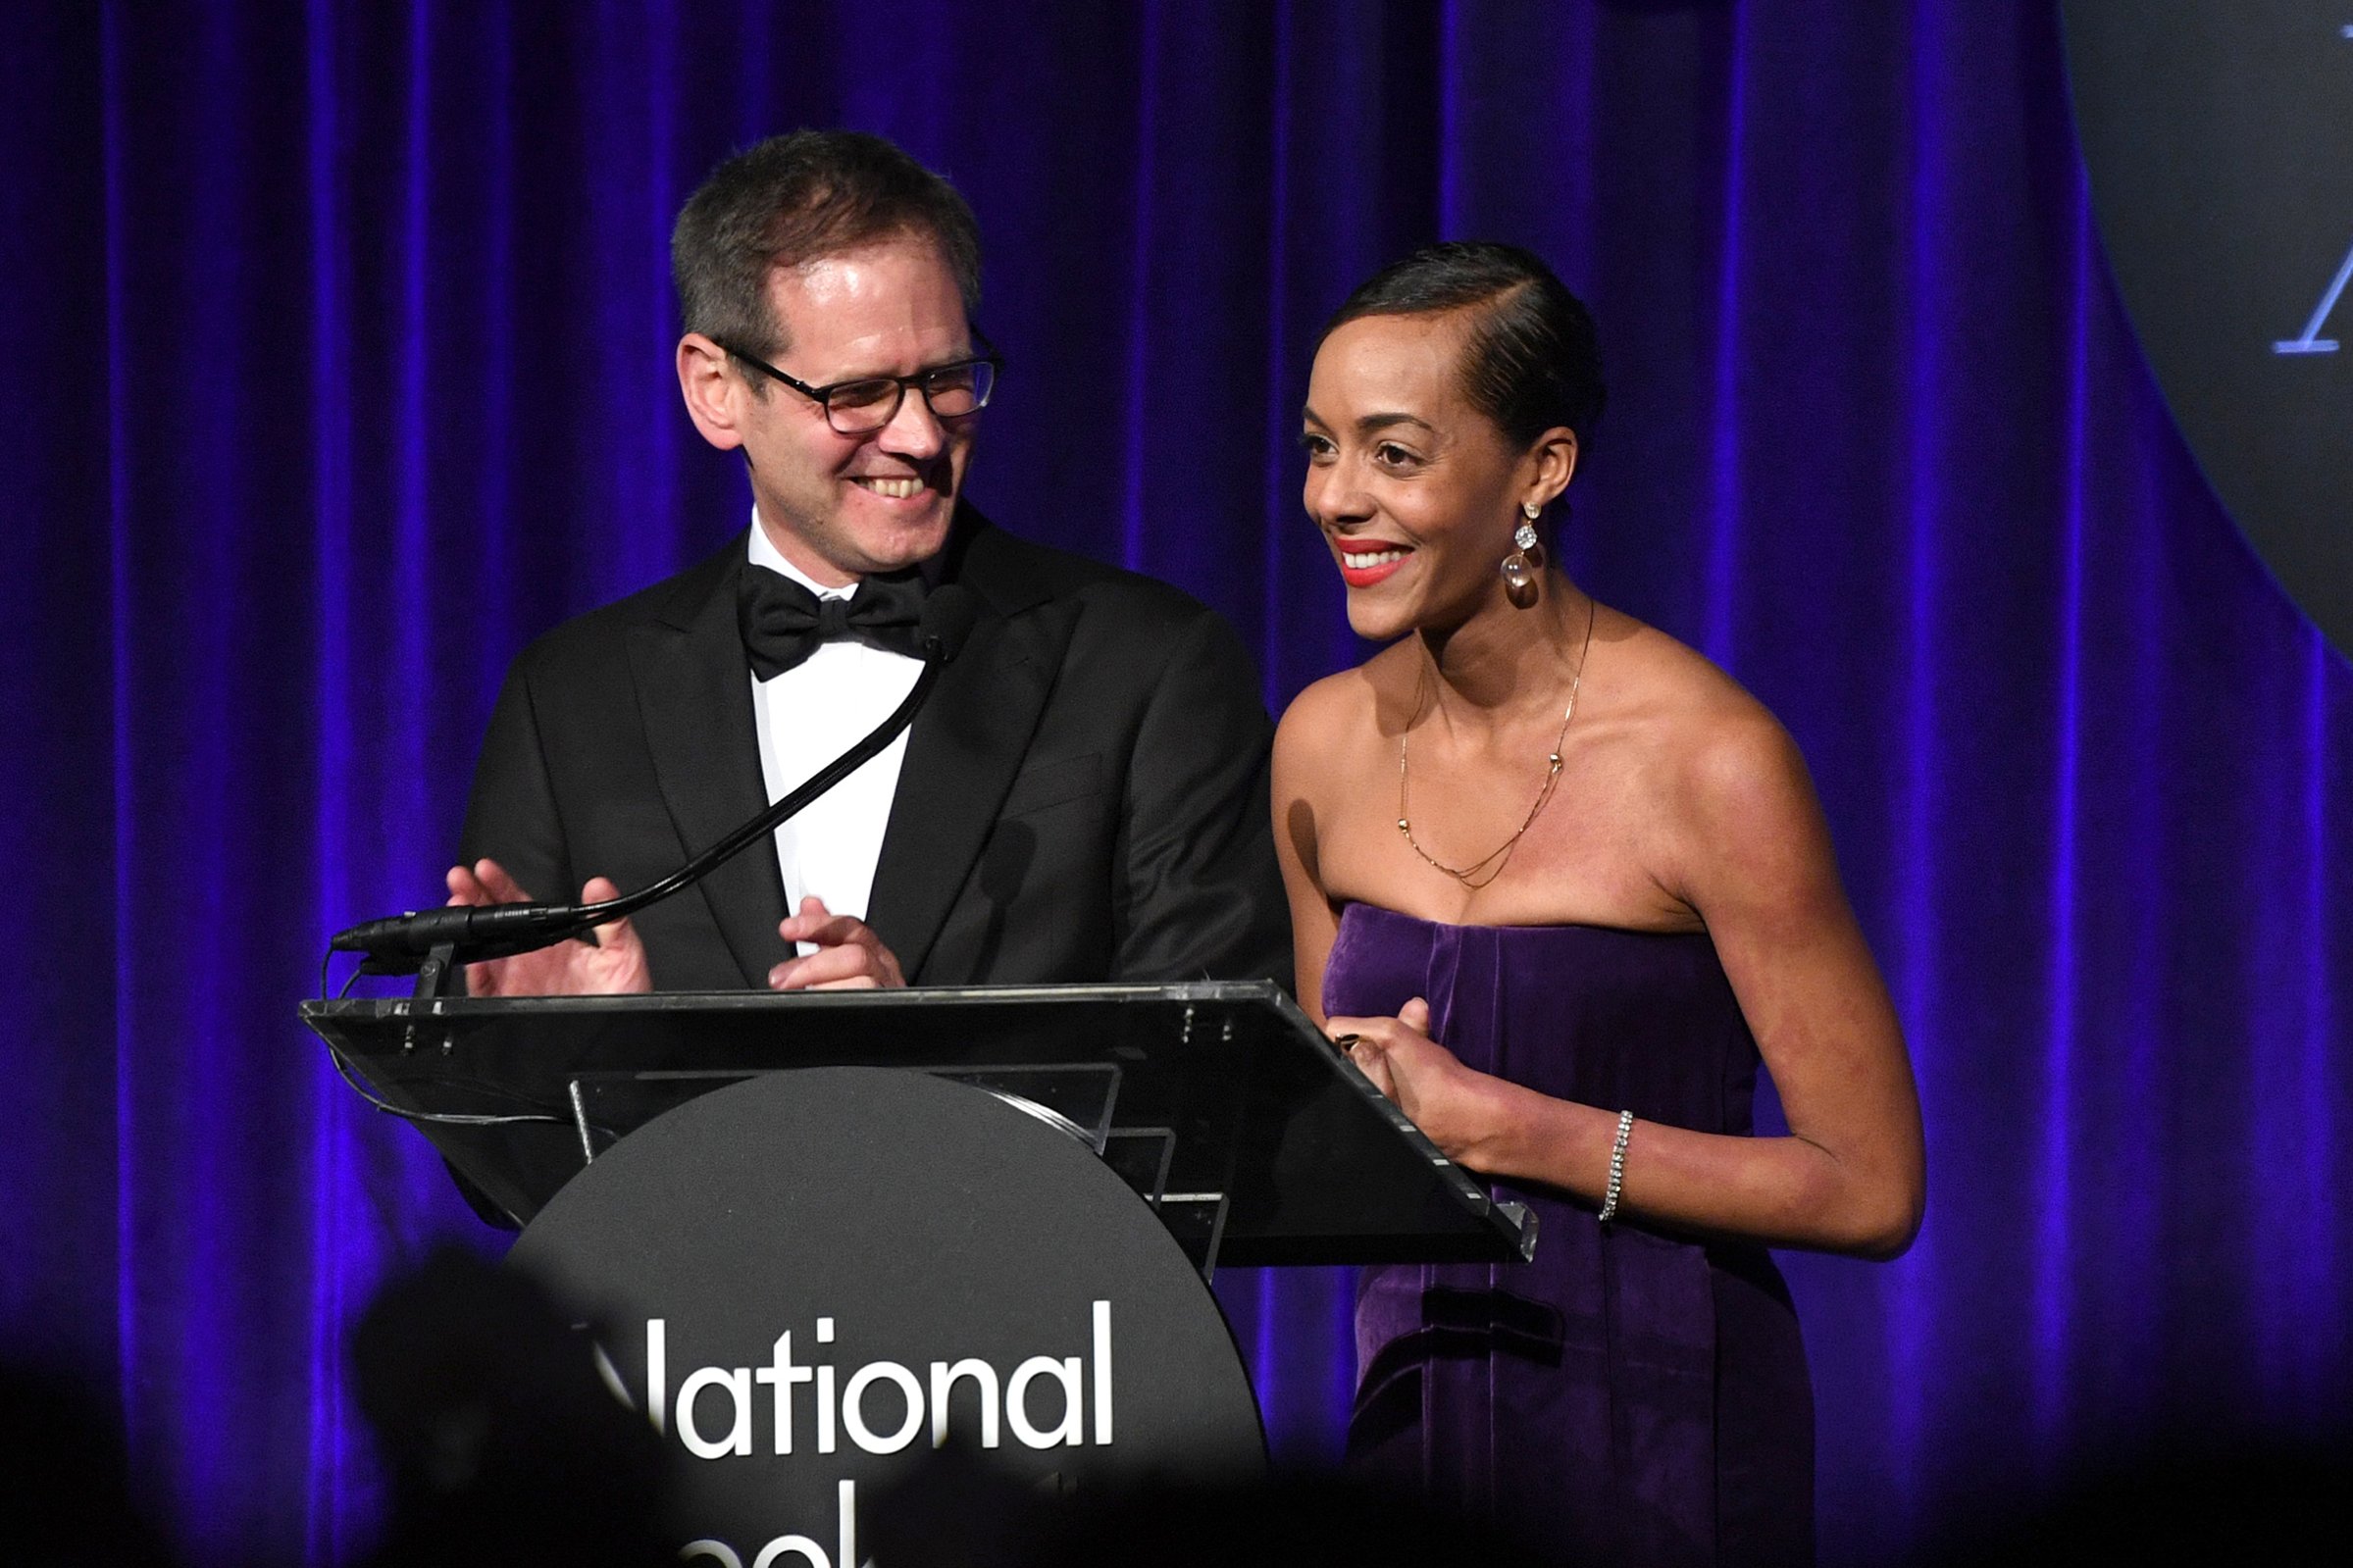 David Steinberger and Lisa Lucas speak onstage during the 68th National Book Awards at Cipriani Wall Street on November 15, 2017 in New York City.